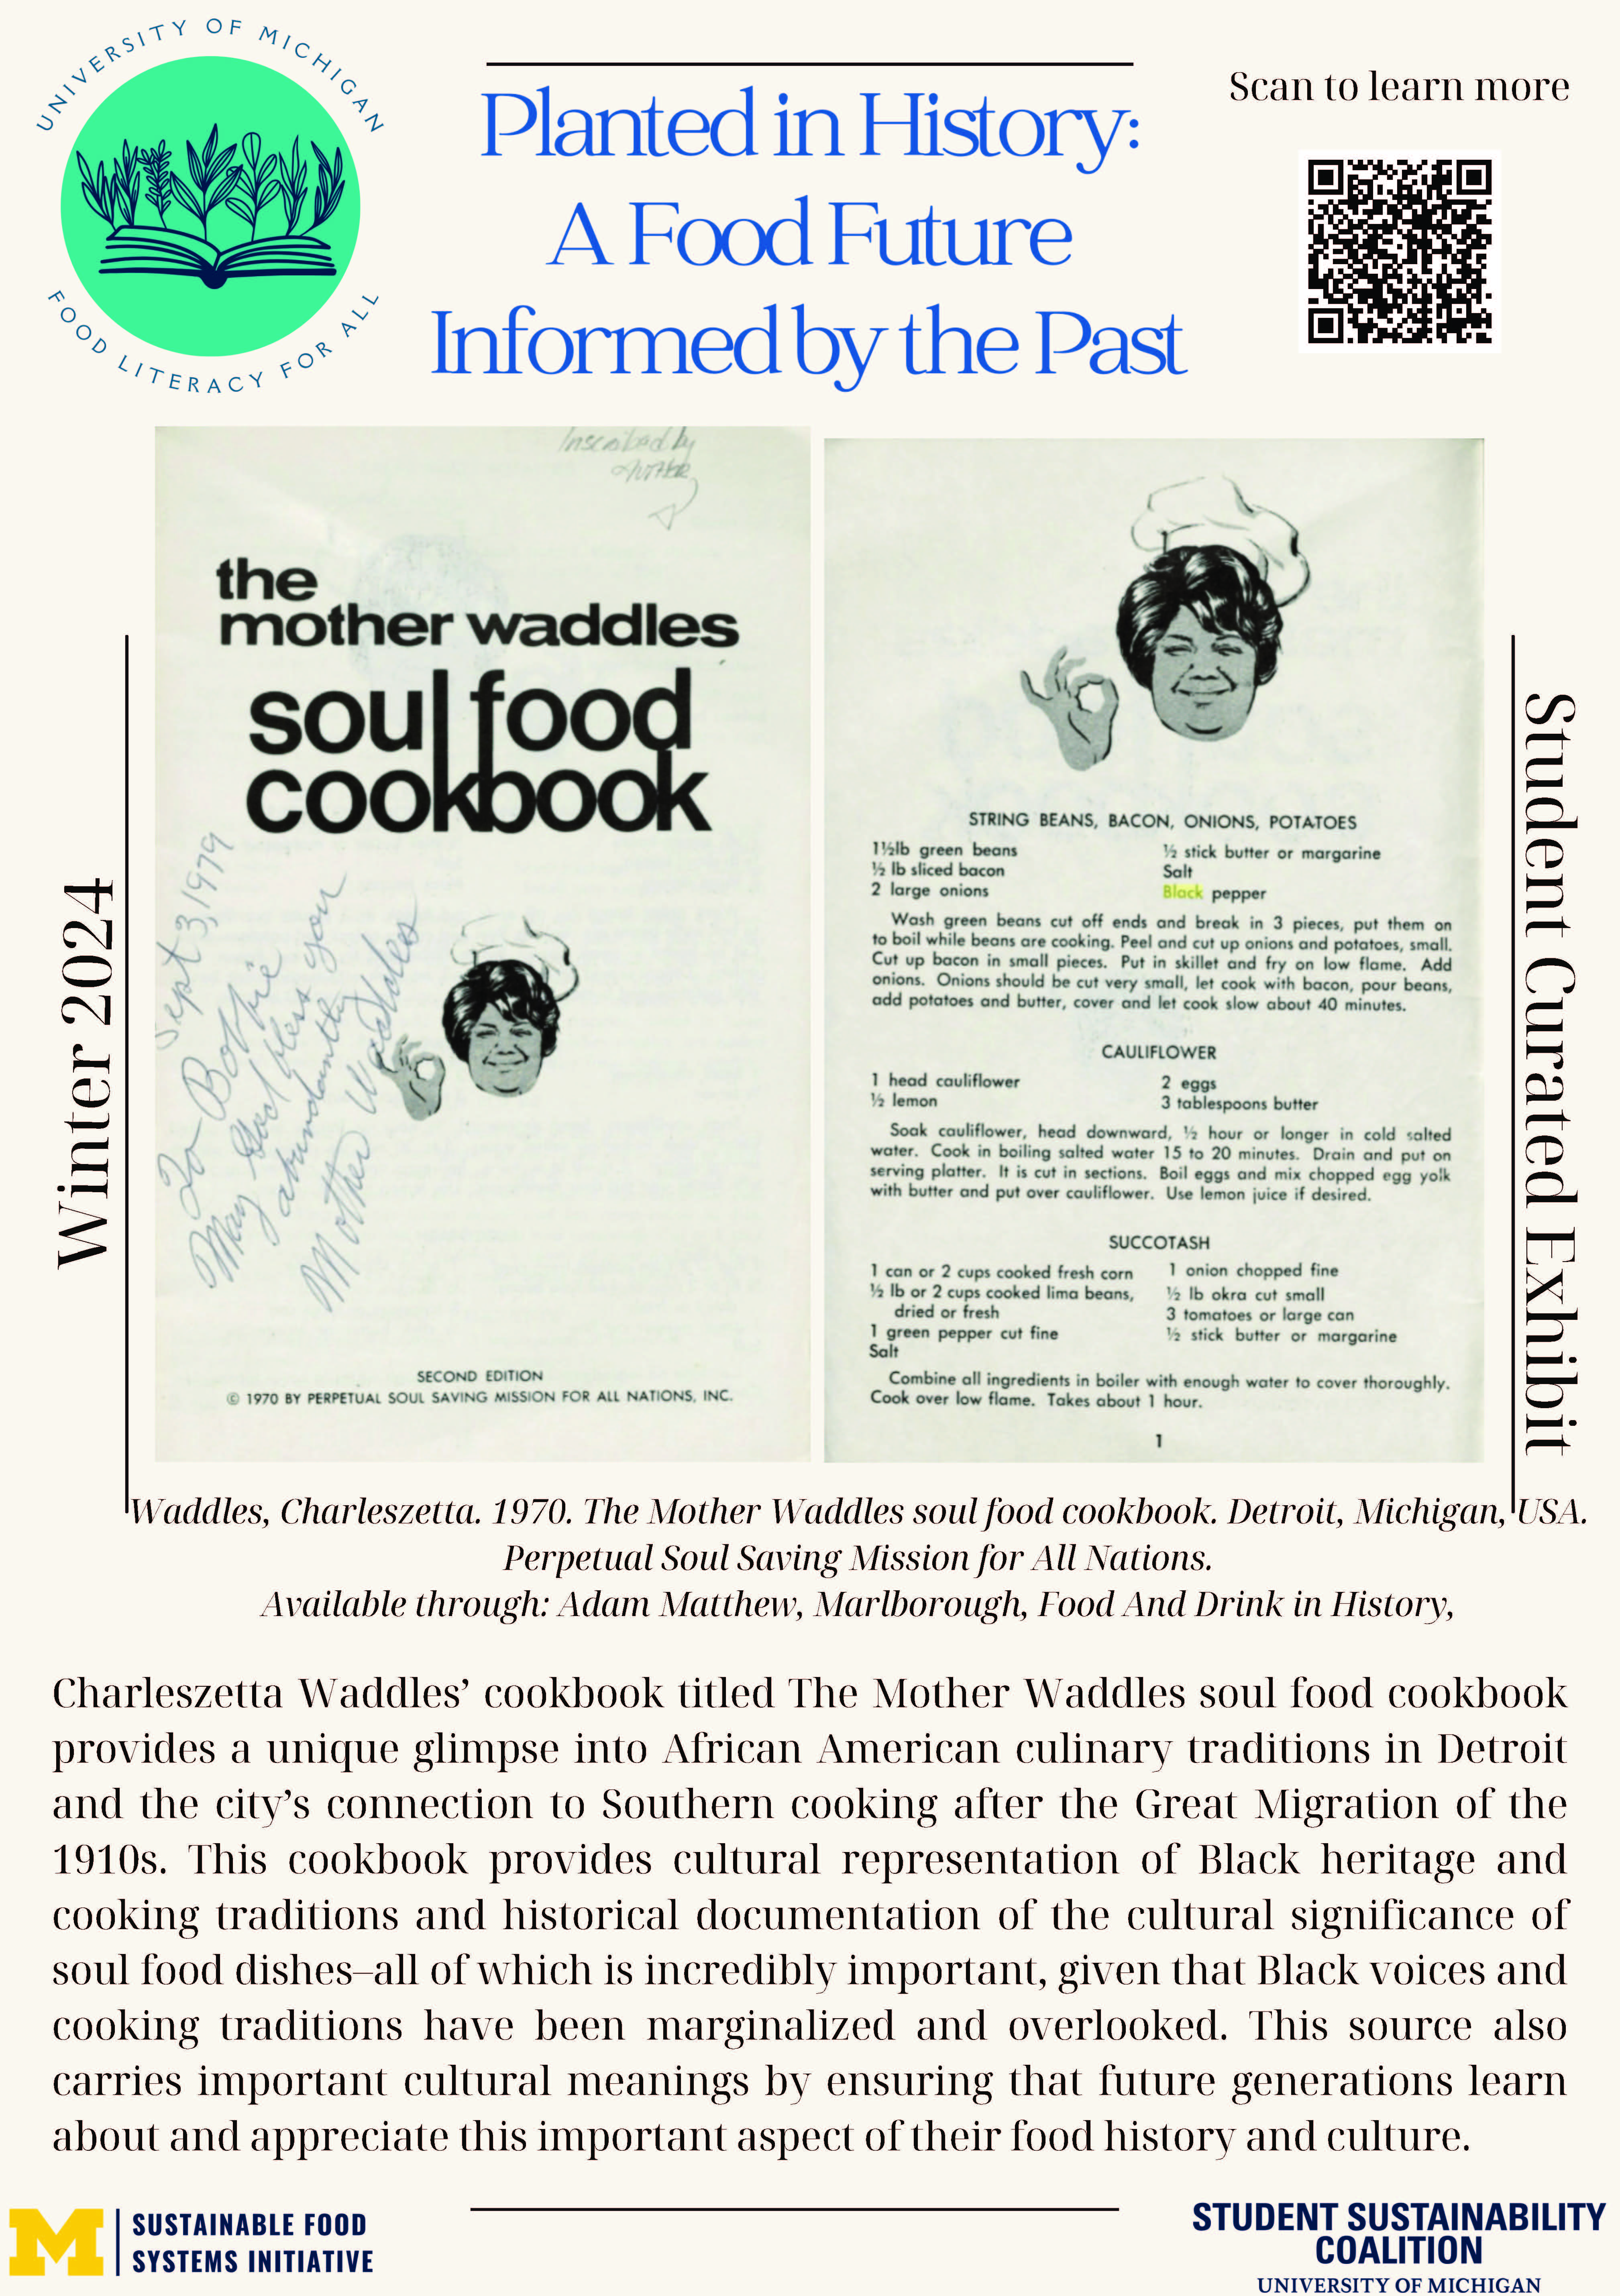 Poster highlighting the title page and a few recipes from The Mother Waddles Soul Food Cookbook (1970). The title page has a small vignette of a black woman with short hair and a chef's hat, and is inscribed from Mother Wattles "to Bobbie." The recipes include "String beans, bacon, onions, potatoes; cauliflower, and succotash." The image is from the Food and Drink in History database. Main text in caption.